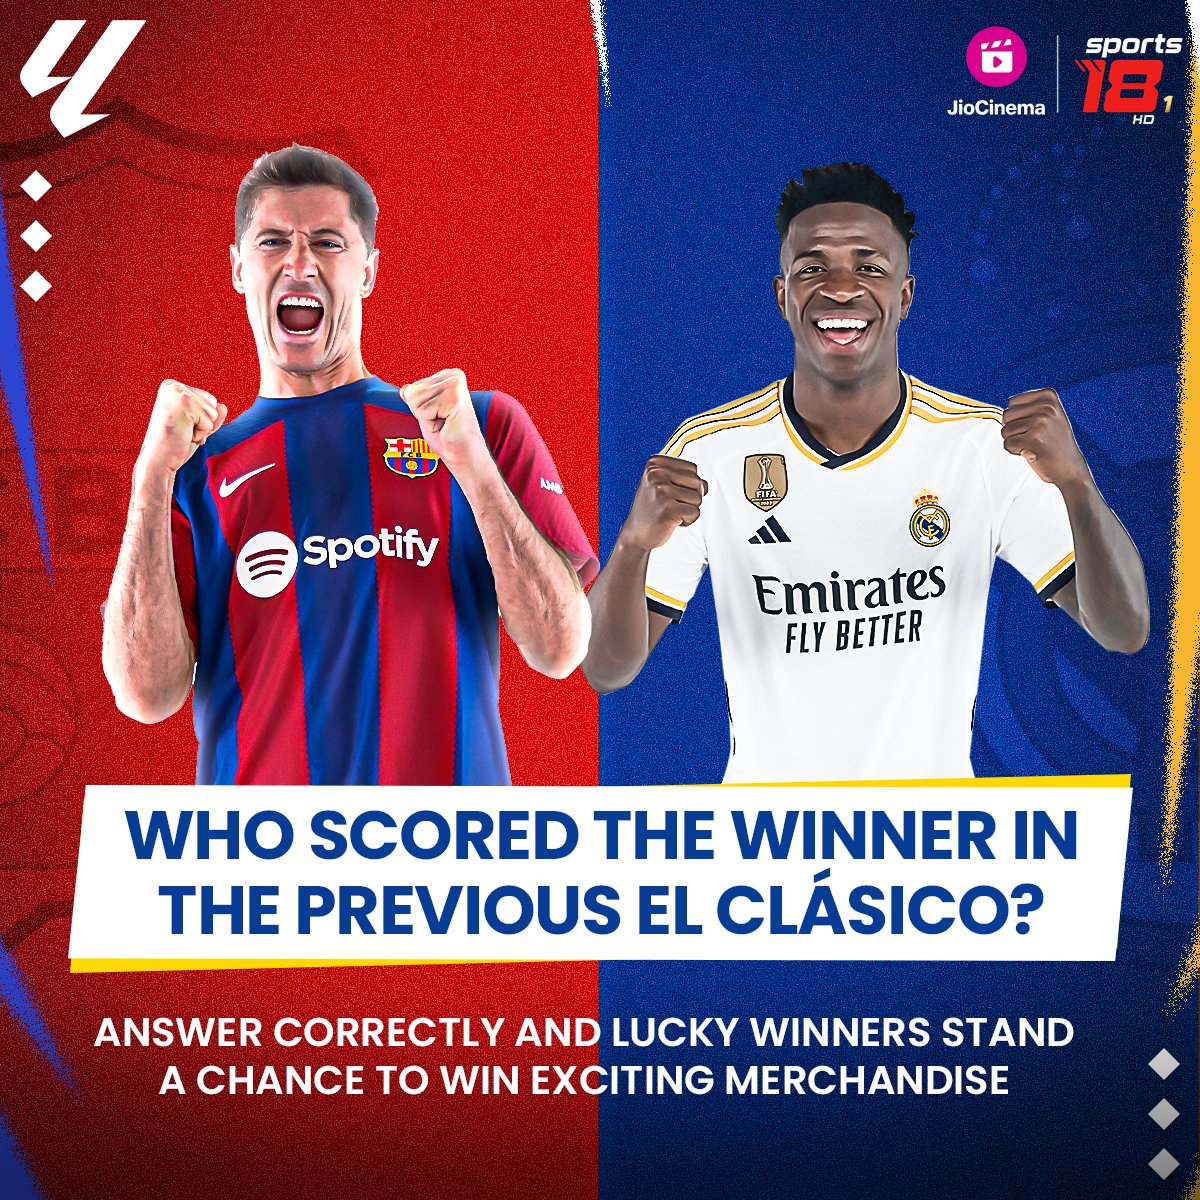 A stunning strike to complete a sensational comeback 💪 

Rings a BELL?😏

Drop your answers and you could be the lucky winner of #LaLiga merchandise 🤩

#LaLigaonJioCinema #LaLigaonSports18 #JioCinemaSports #LaLigaEpics